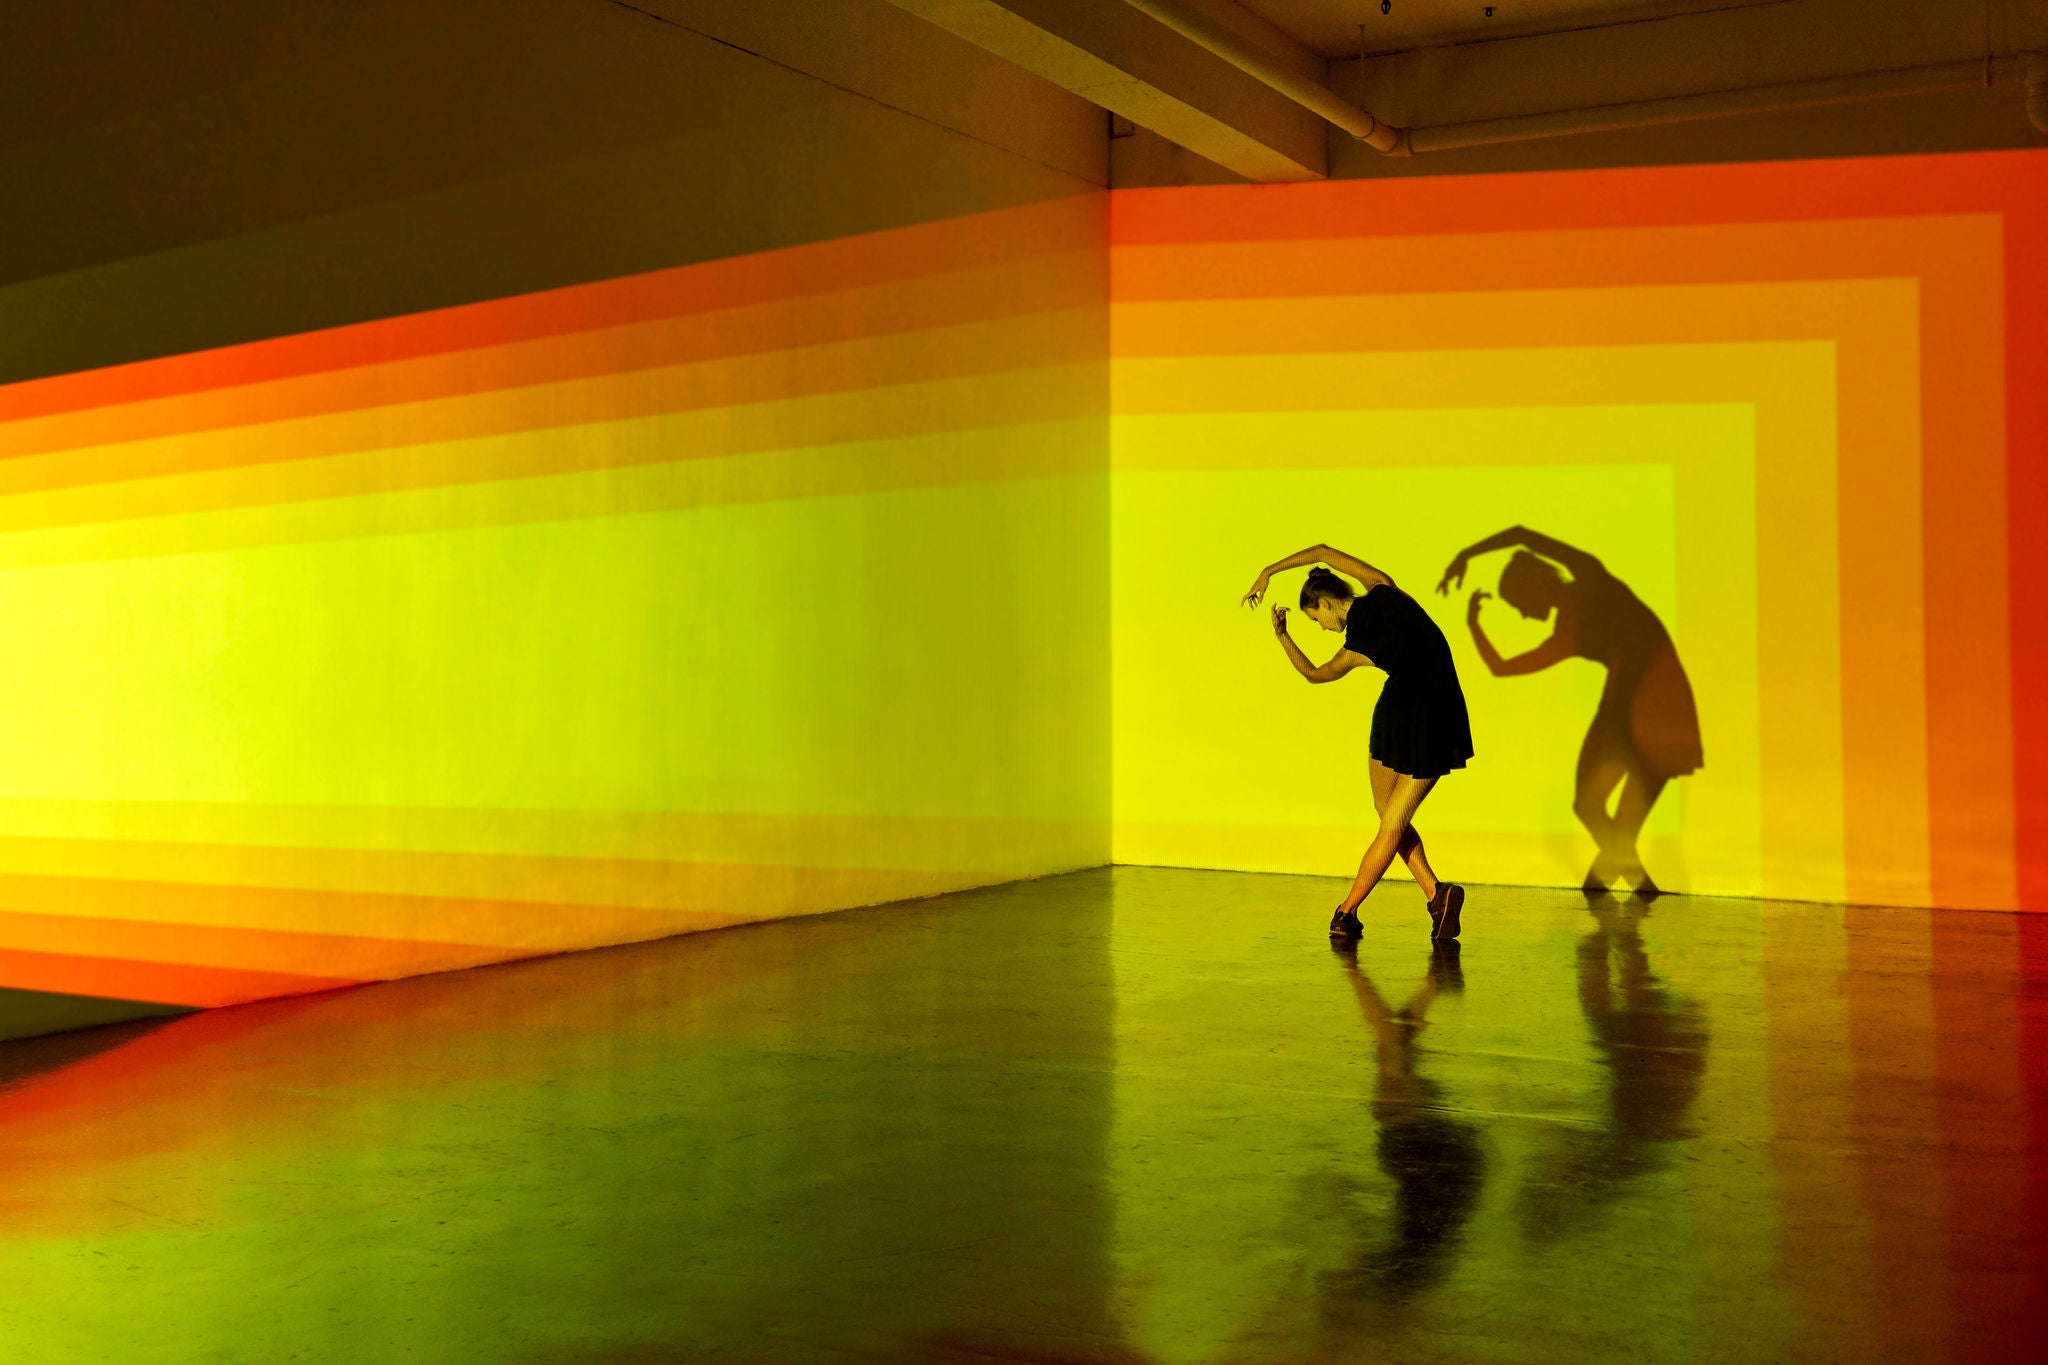 Girl dancing in an abstract space with strong graphic shapes being projected onto the walls behind her